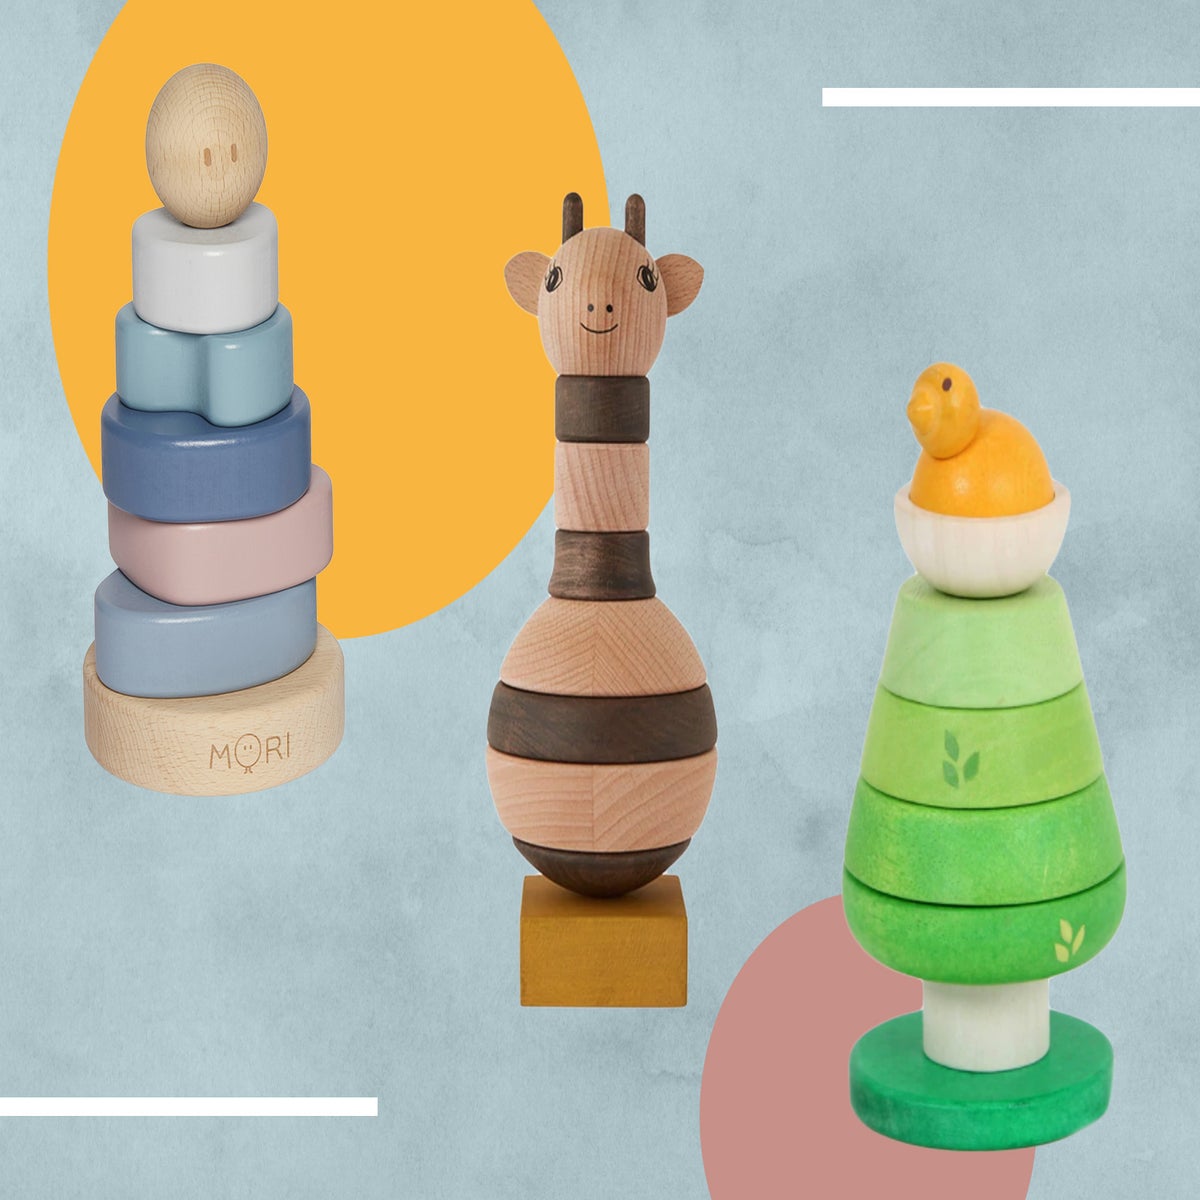 Infant, early childhood and early learning wooden toys - Janod